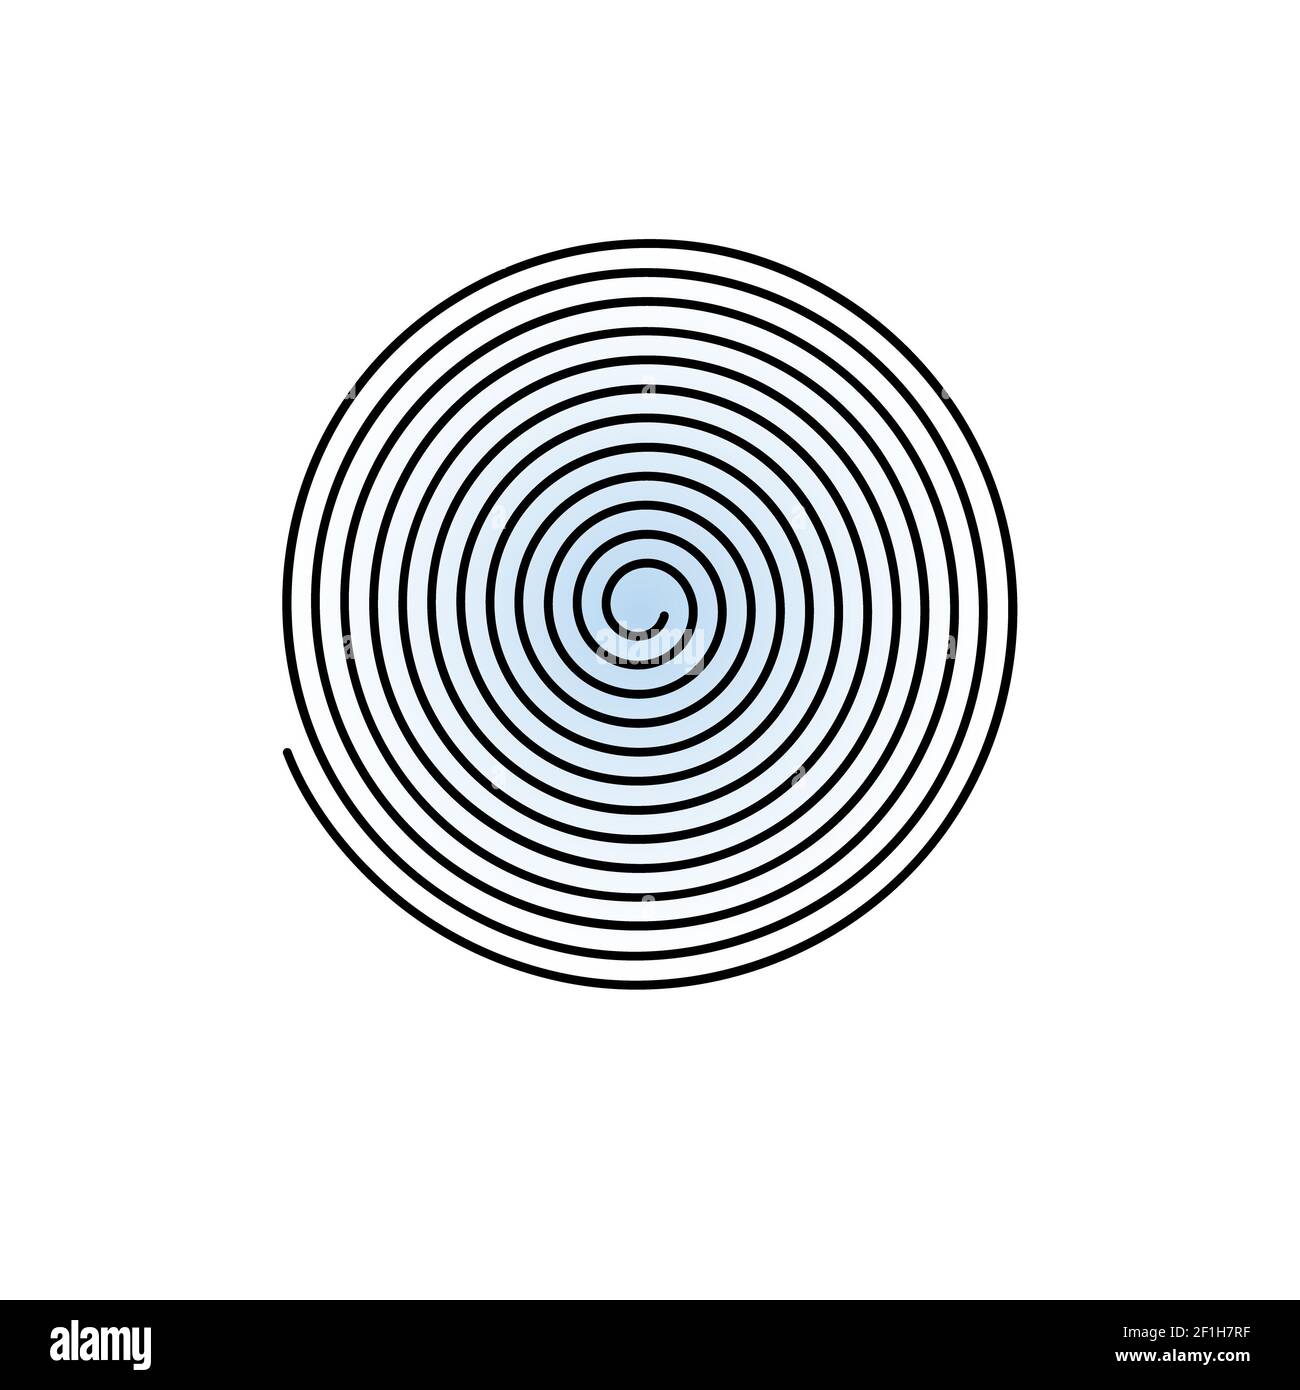 Volute, spiral, concentric lines, circular, rotating background Stock Photo